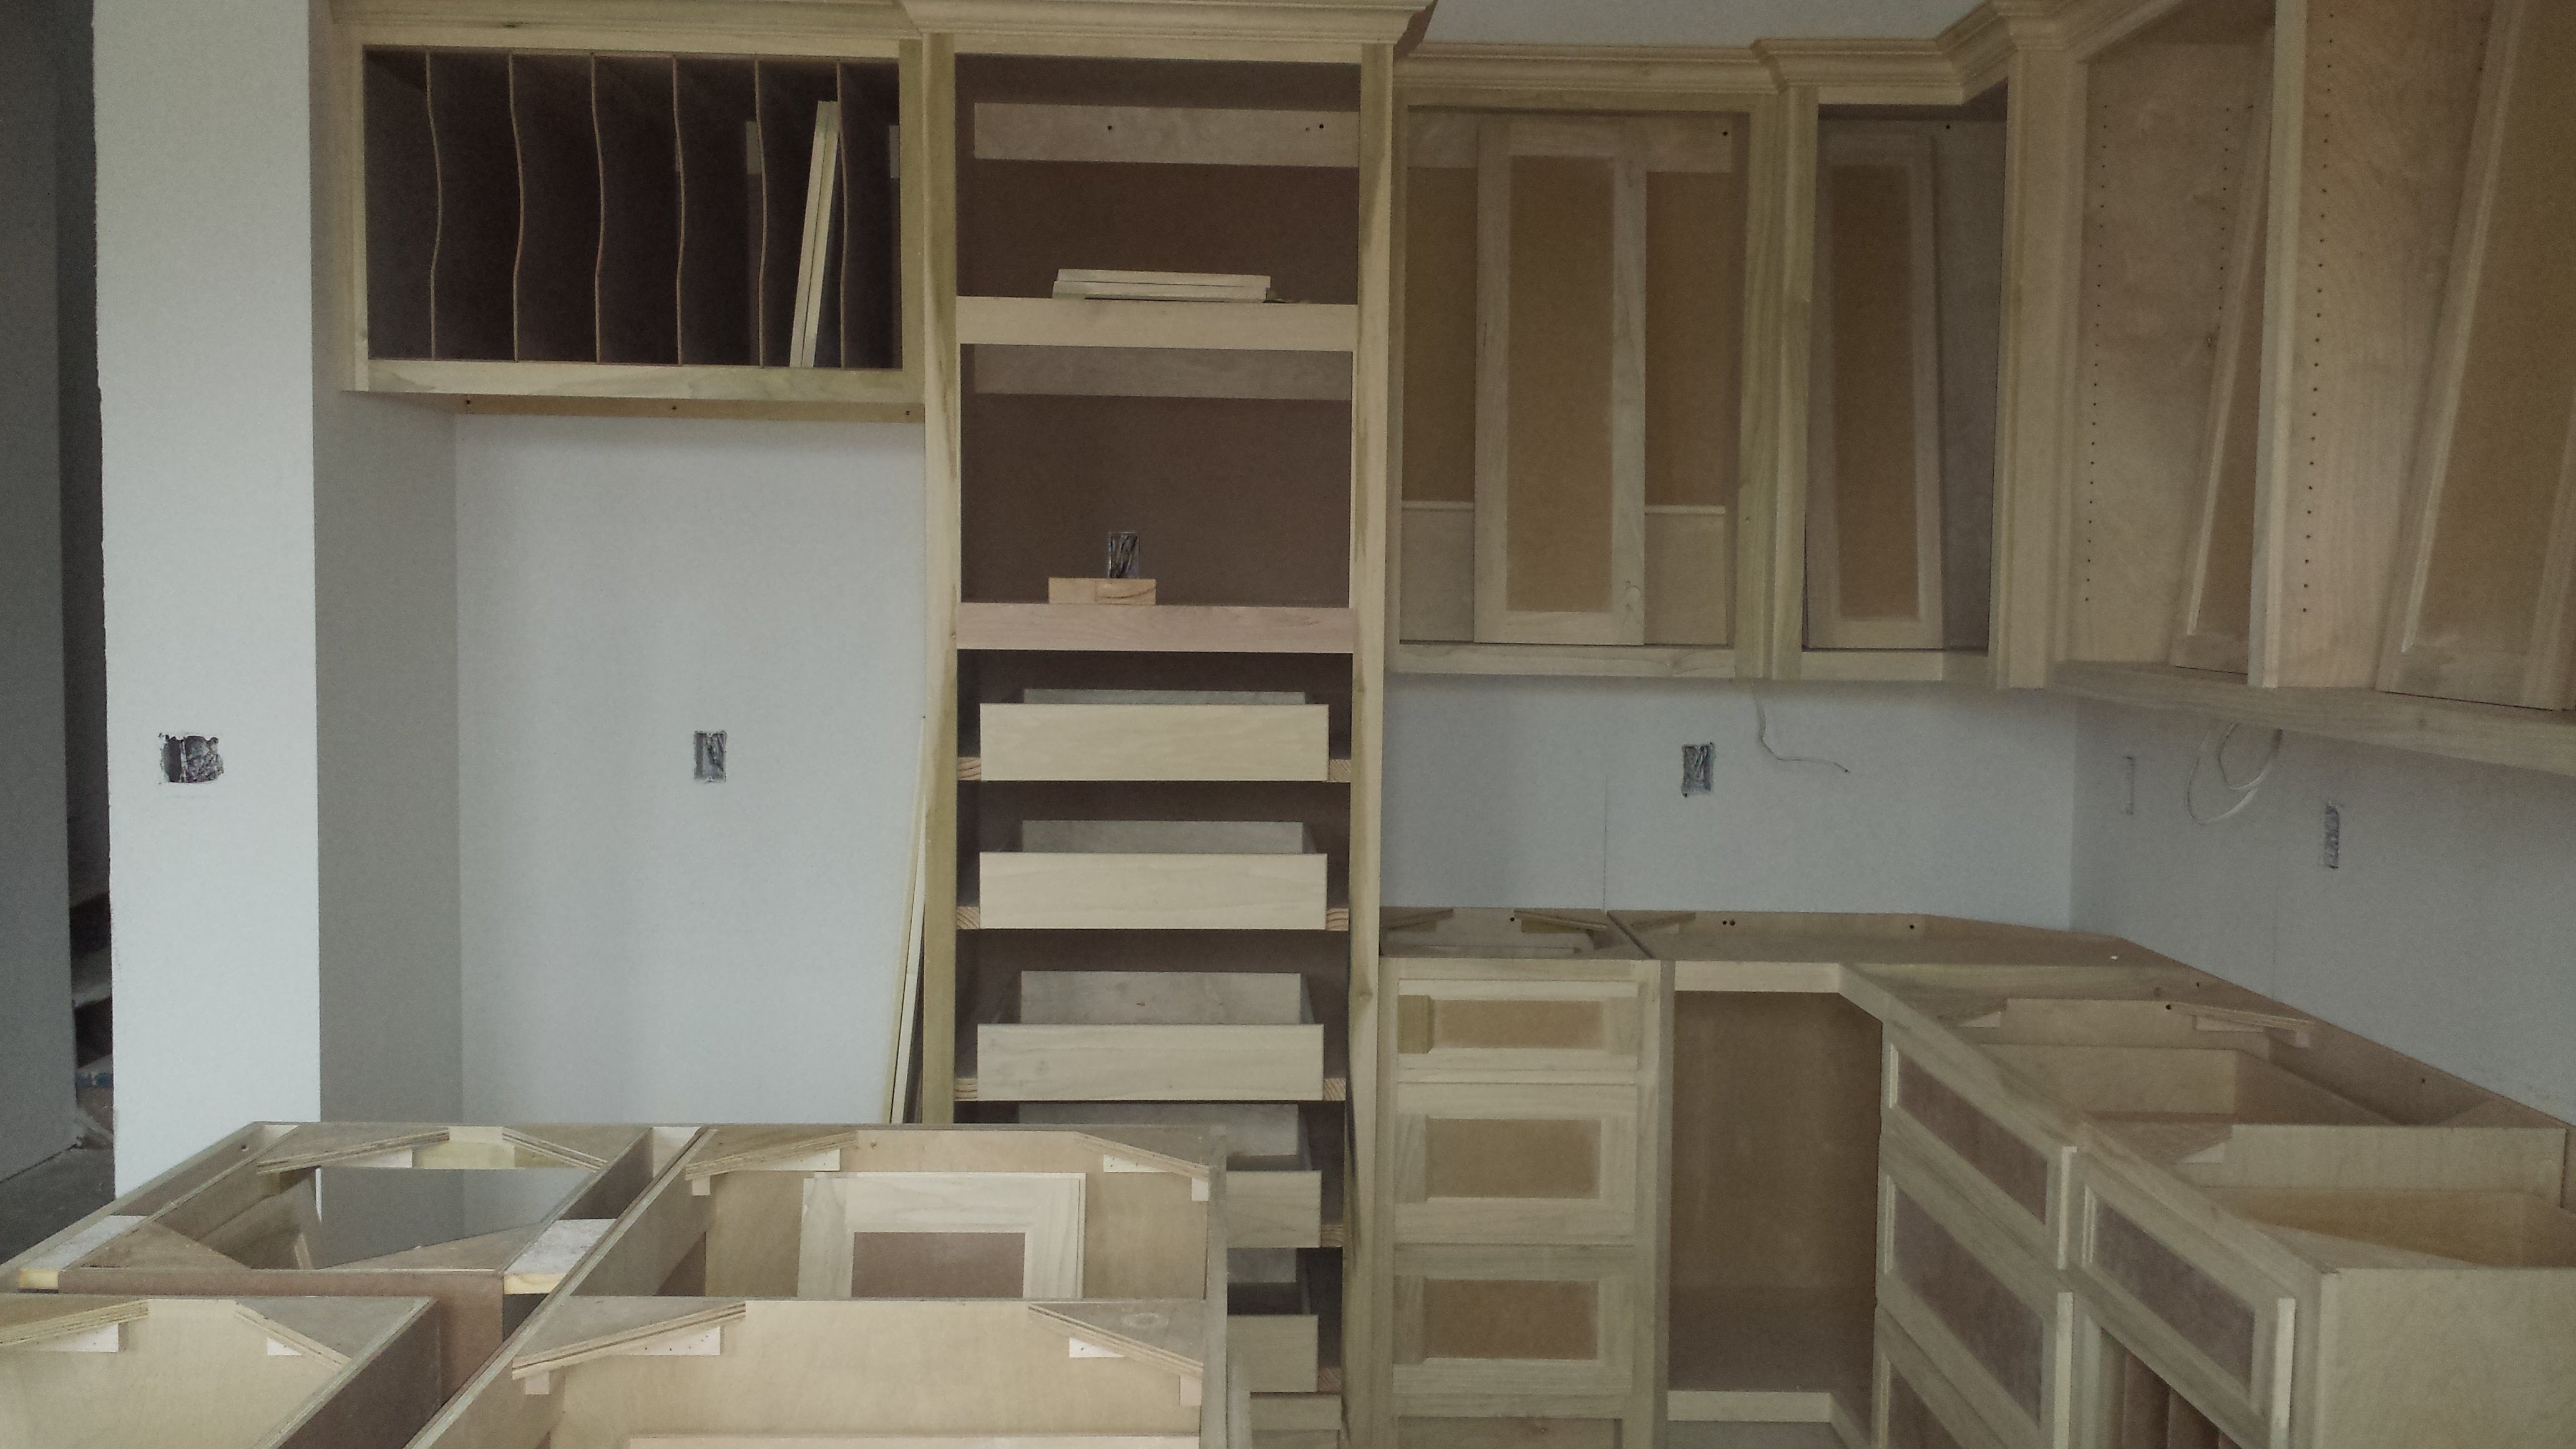 cabinets framed in